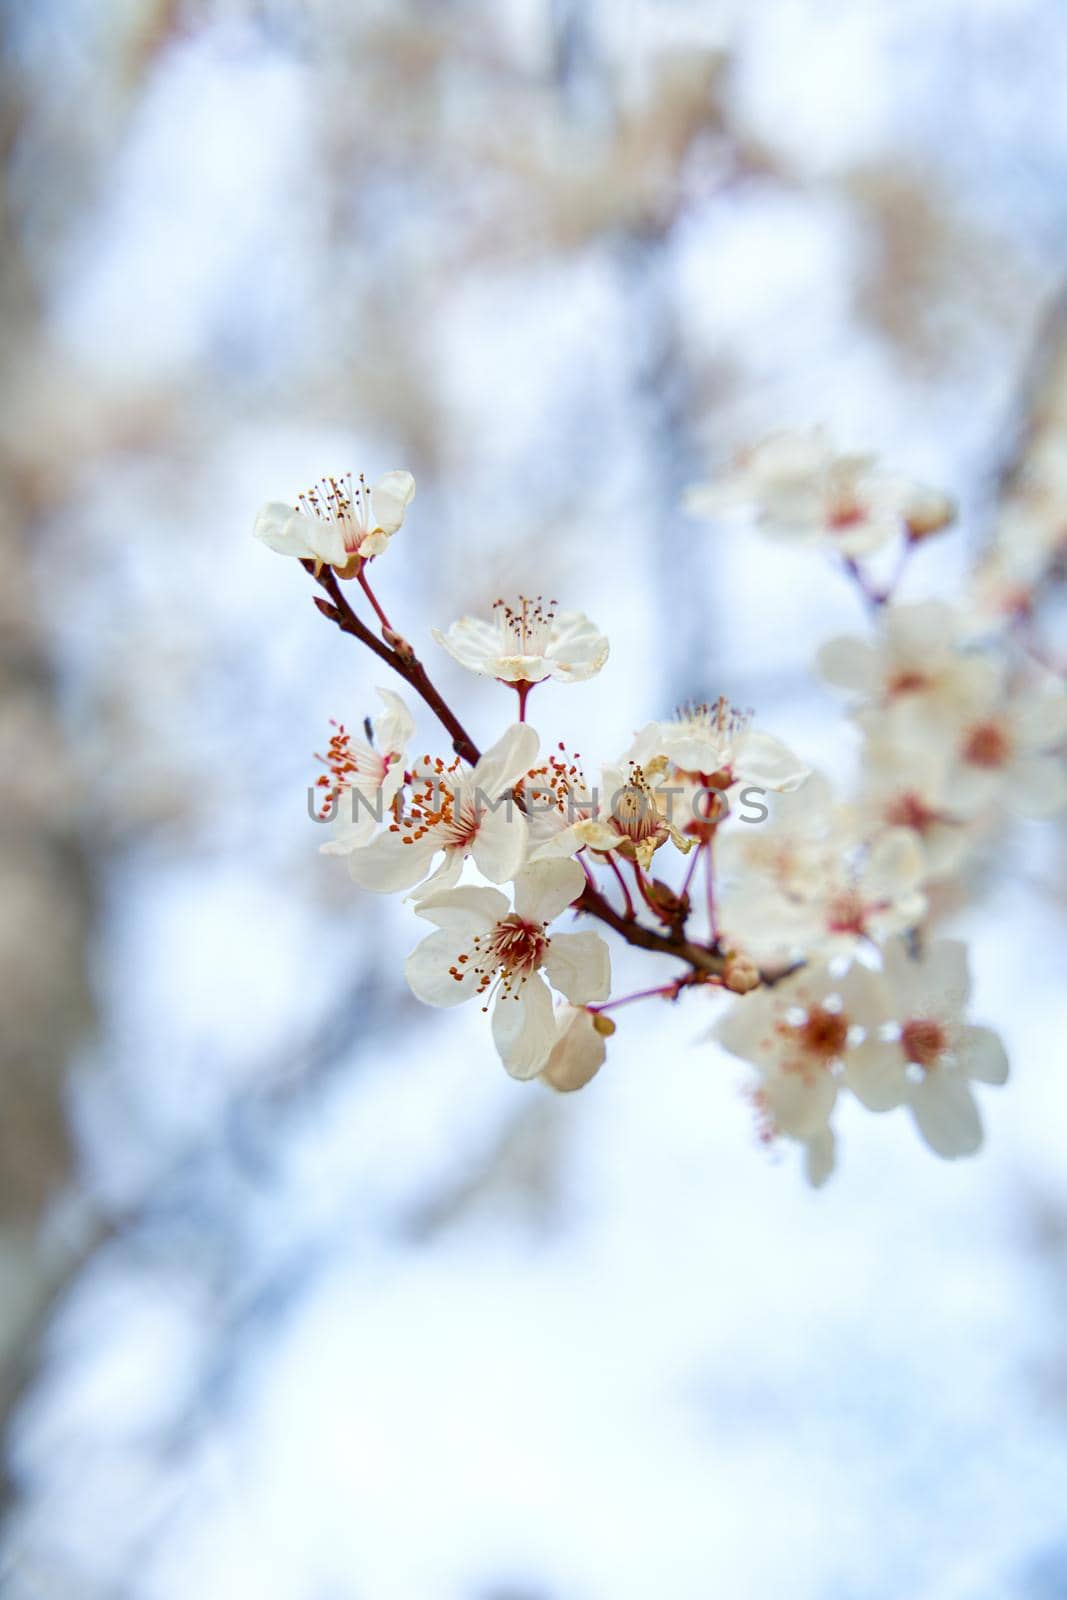 Apricot trees bloom with white flowers in early spring.